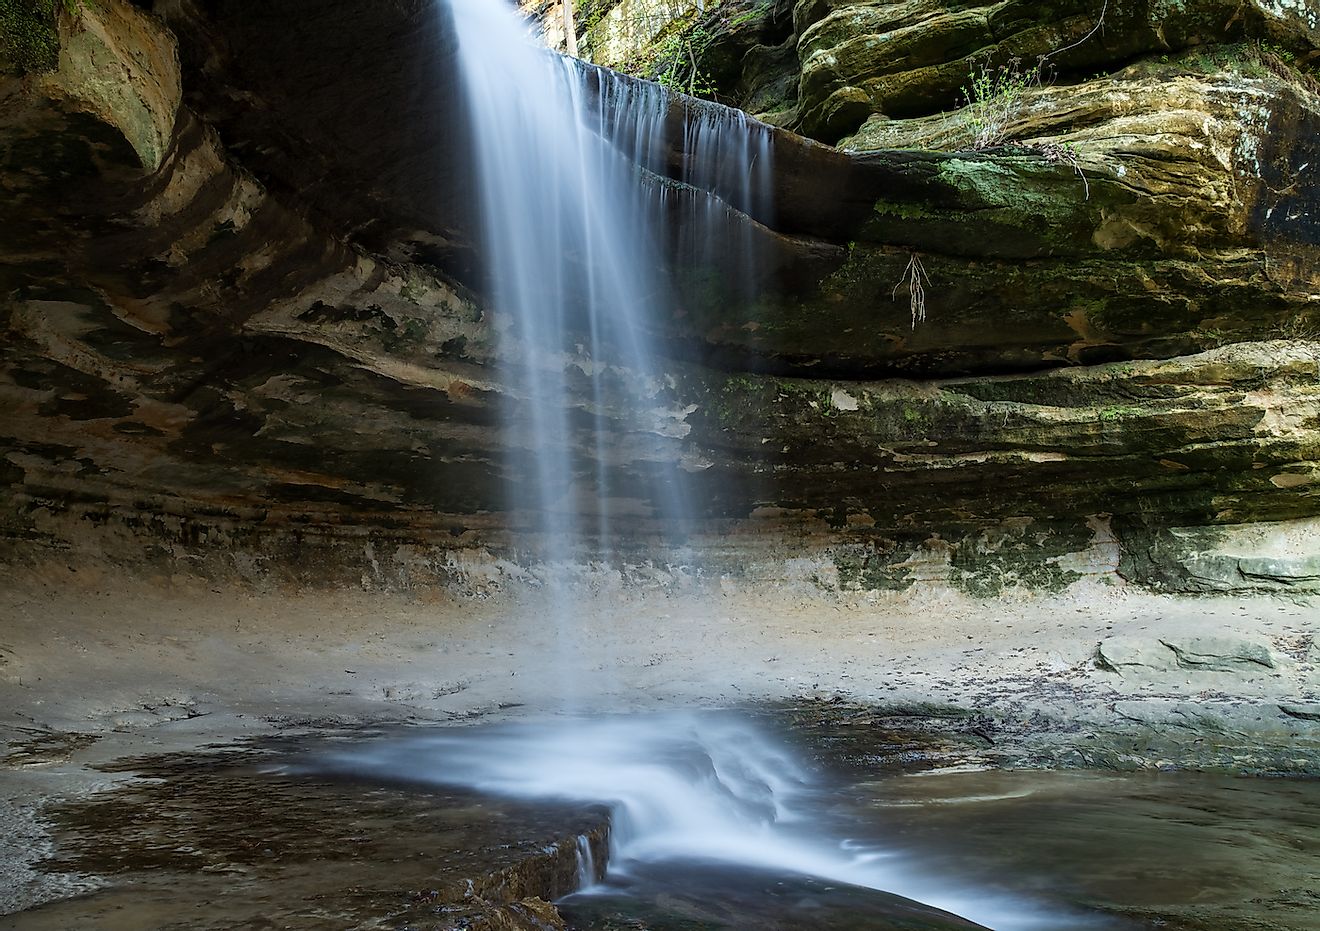 Waterfall flowing through LaSalle canyon on a beautiful spring morning. Starved Rock state park, Illinois. Image credit: Nicola Patterson/Shutterstock.com